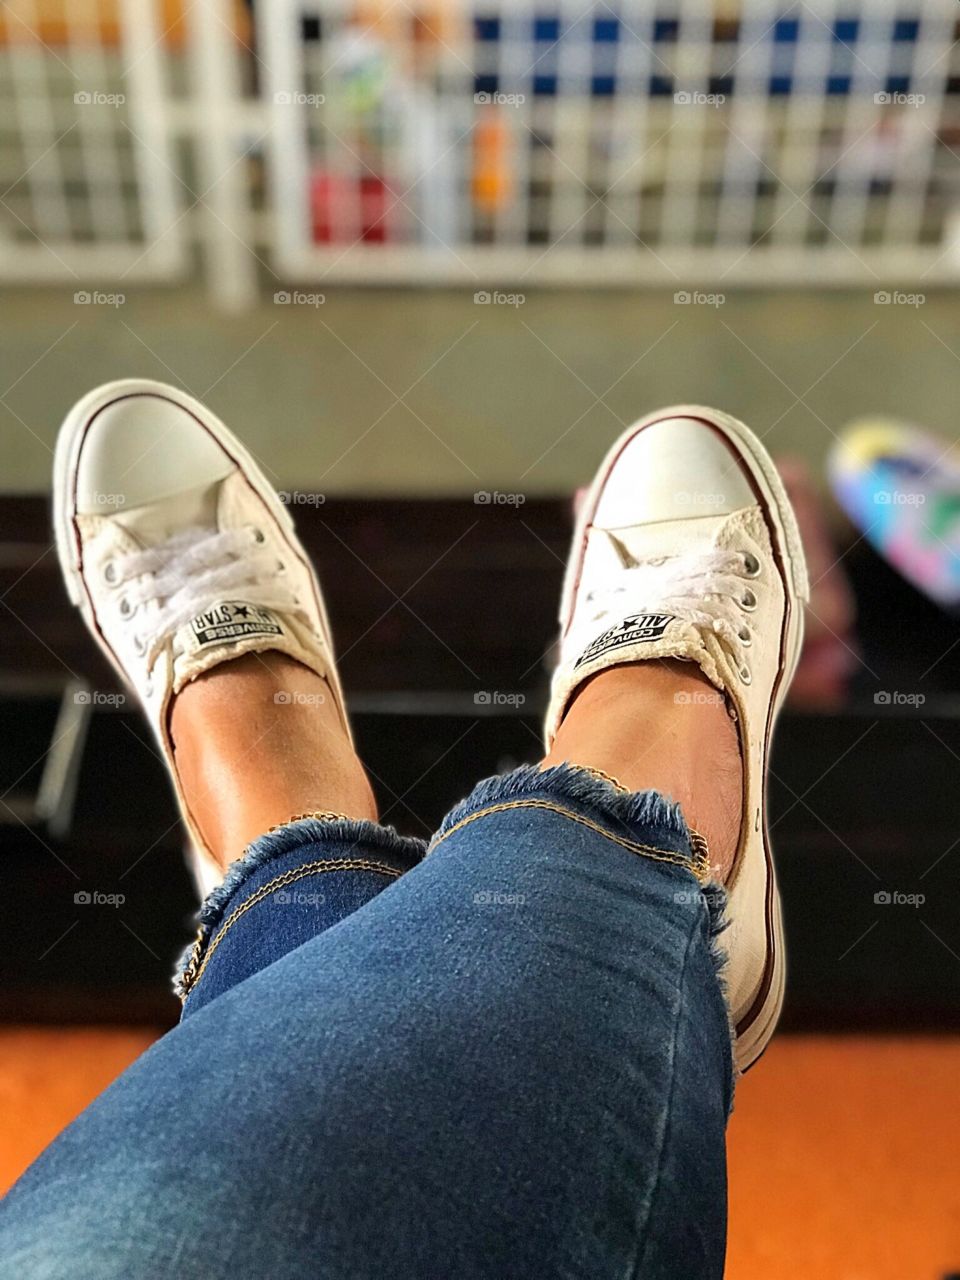 Legs stretched out wearing white sneakers all-star converse. 